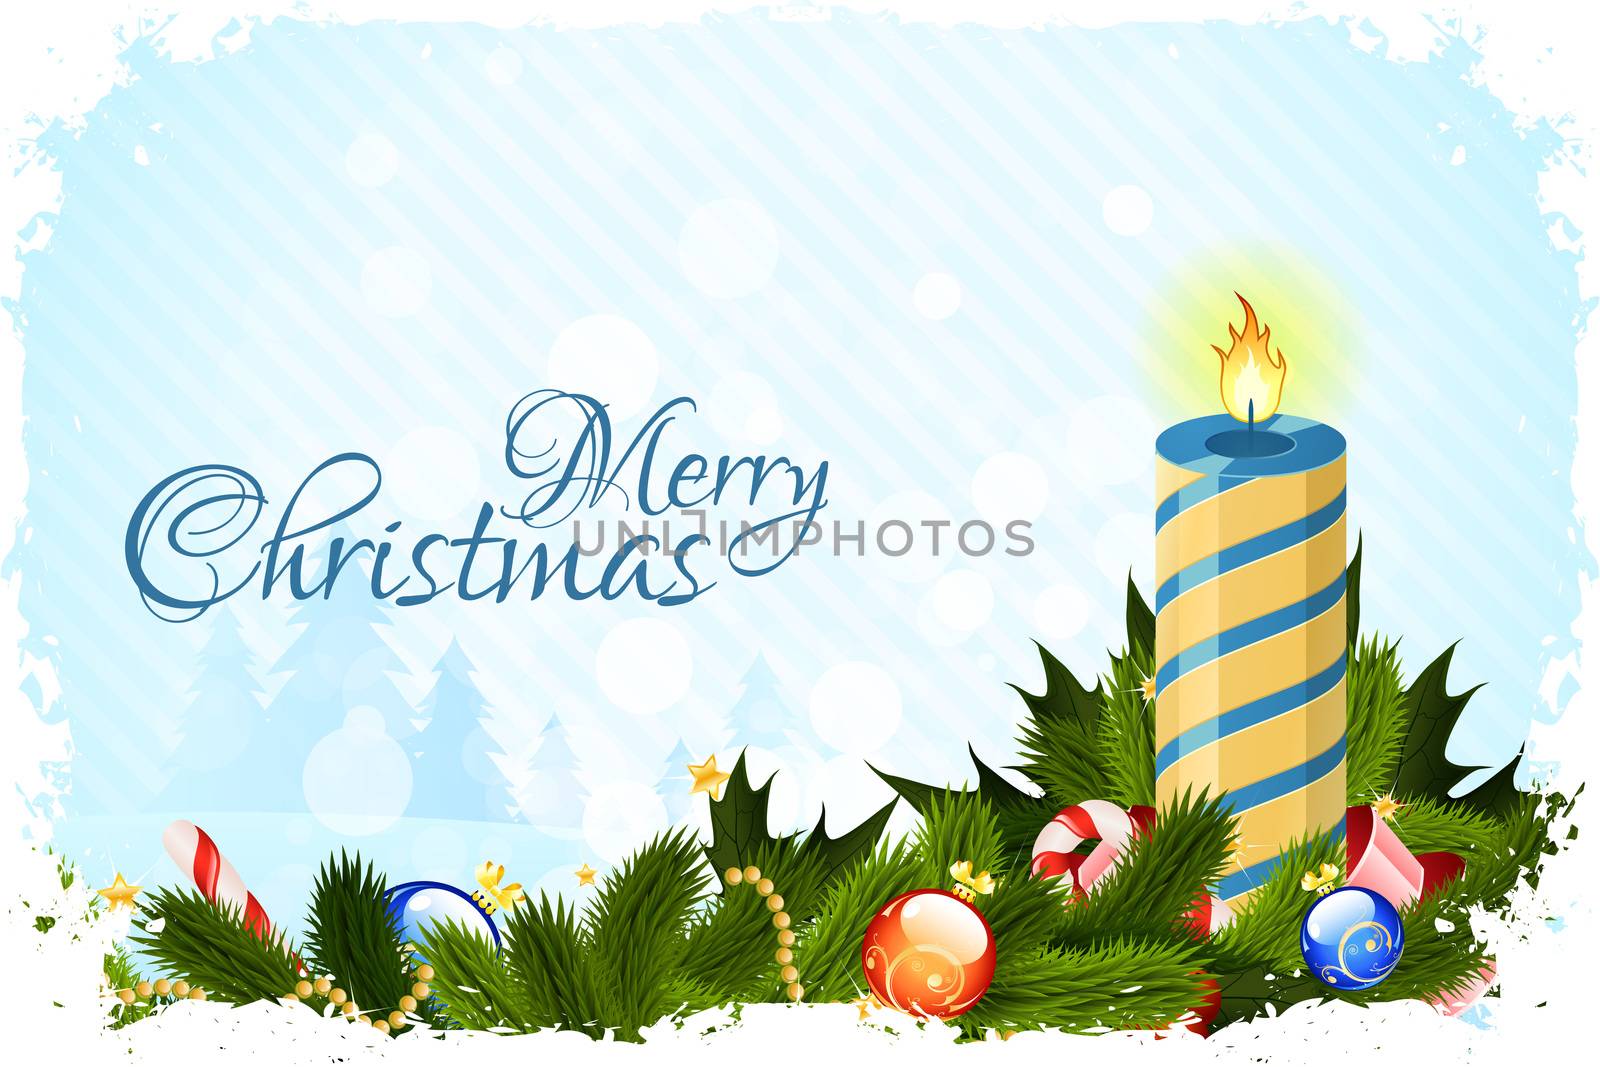 Grungy Christmas Card with Candle Fir Trees and Decoration